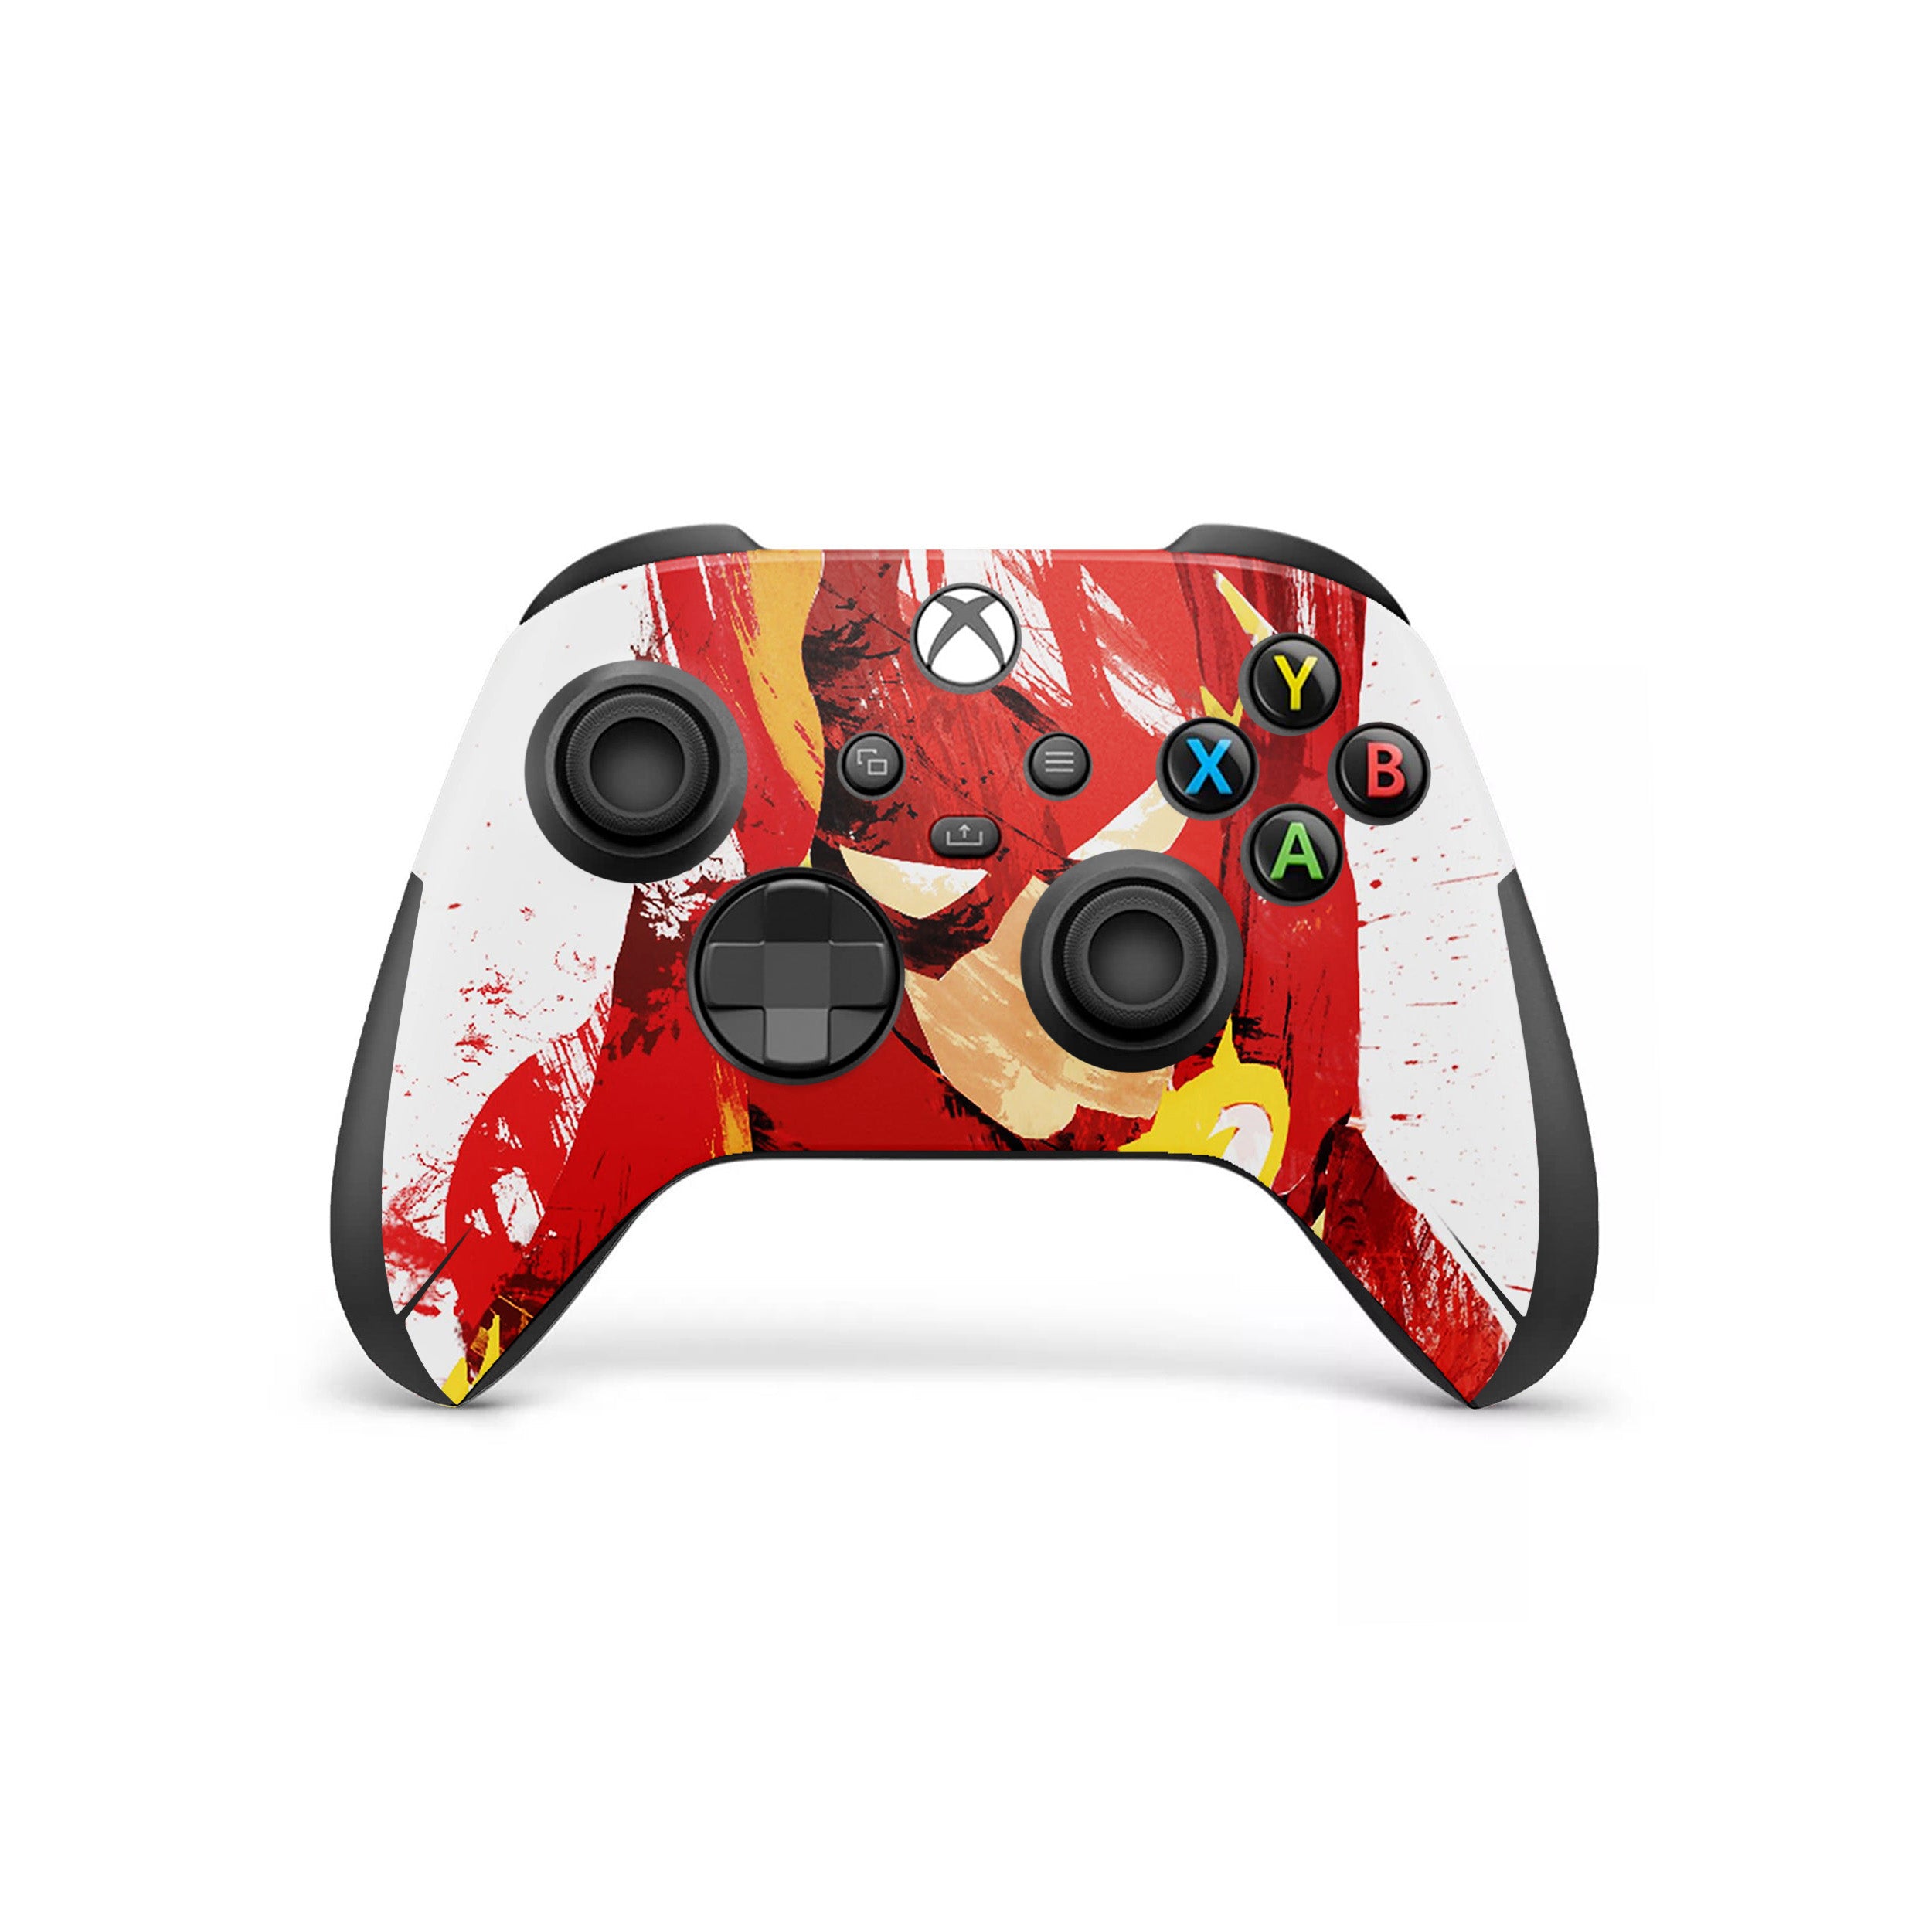 A video game skin featuring a Marvel Flash design for the Xbox Wireless Controller.